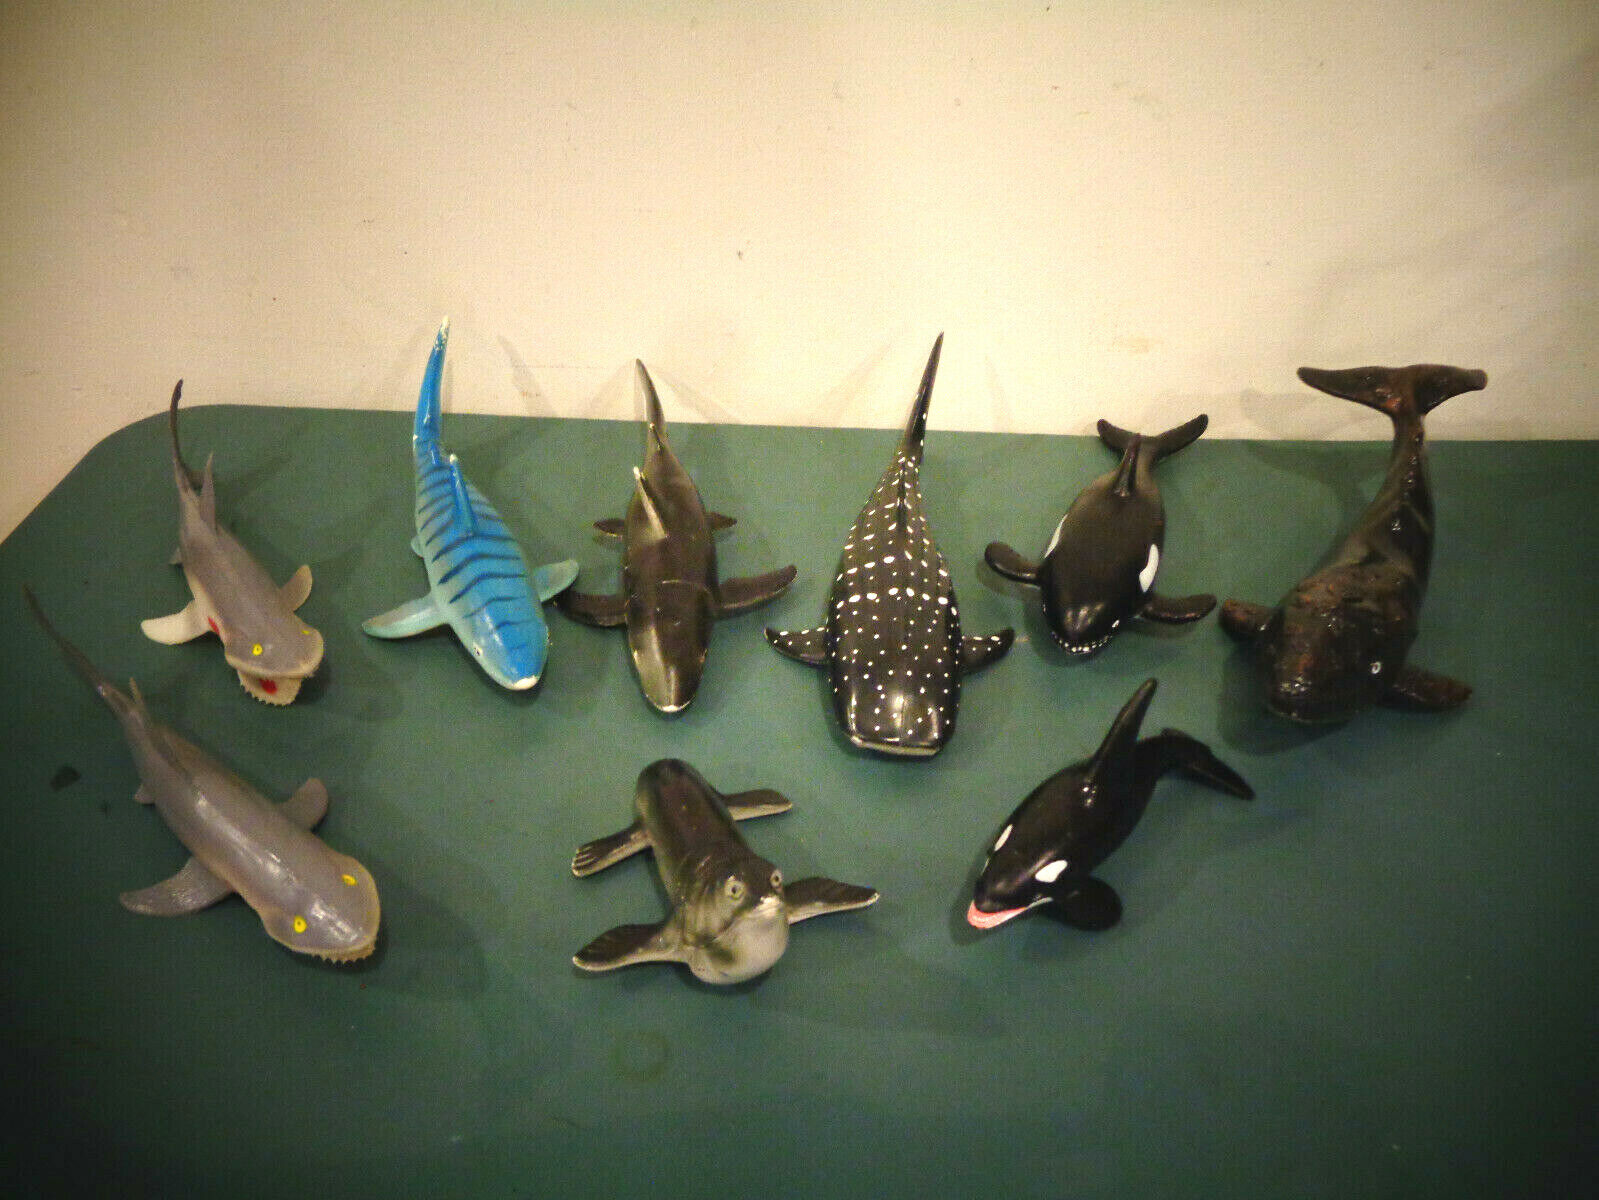 LOT OF 9 LARGE TOY RUBBER PLASTIC PVC SEA ANIMALS FIGURES WHALES